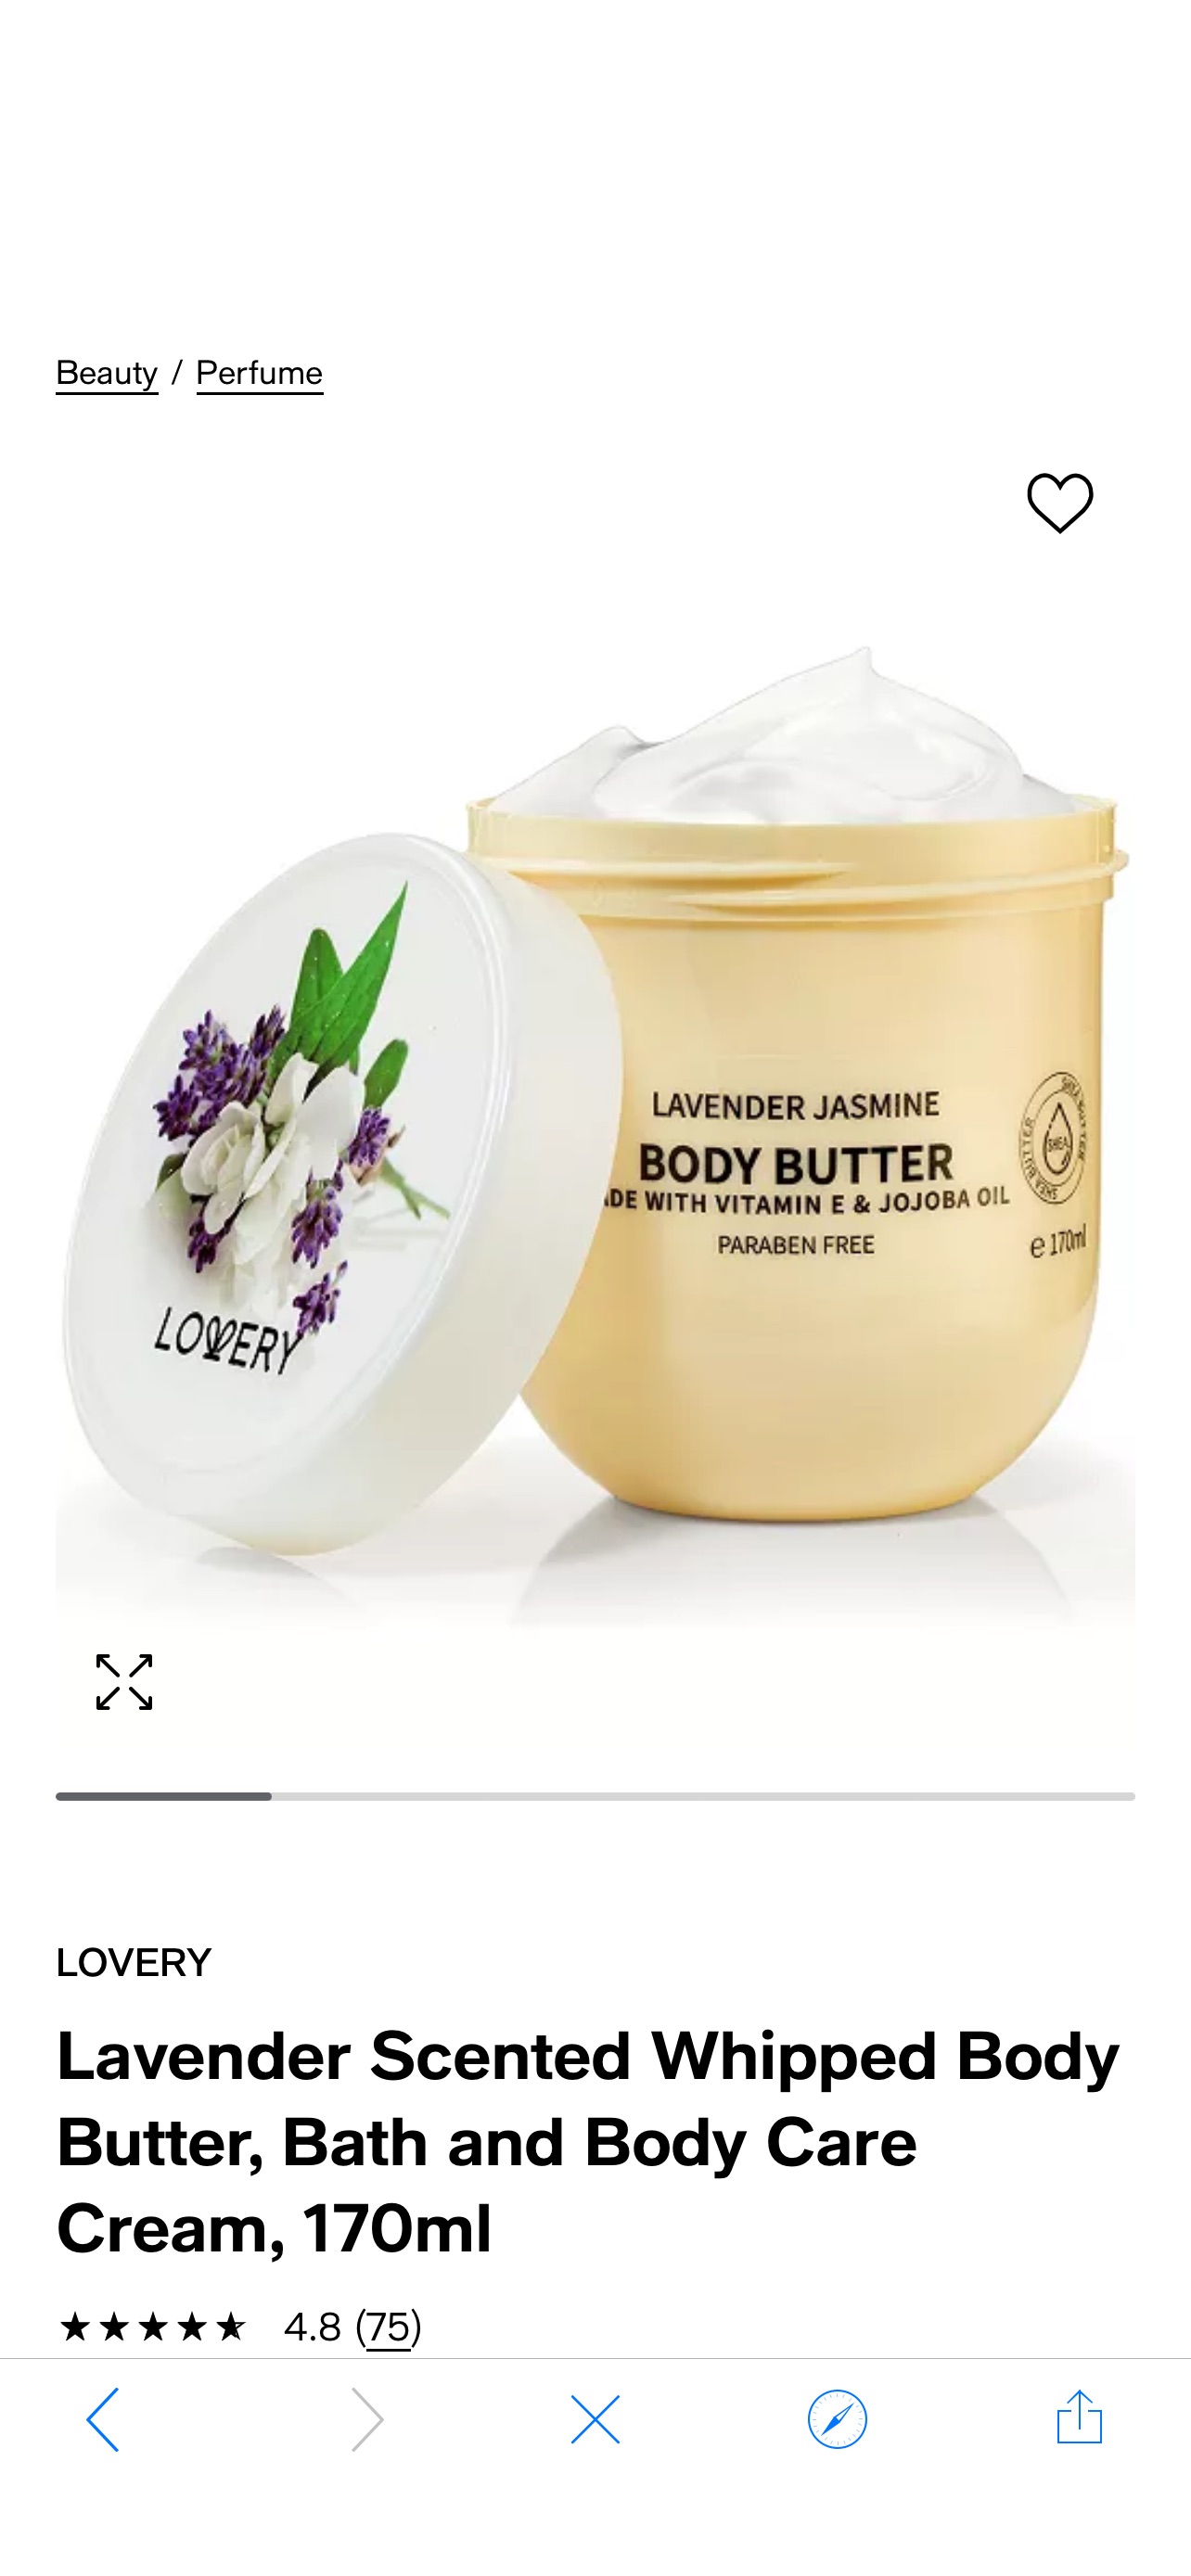 Lovery Lavender Scented Whipped Body Butter, Bath and Body Care Cream, 170ml & Reviews - Perfume - Beauty - Macy's